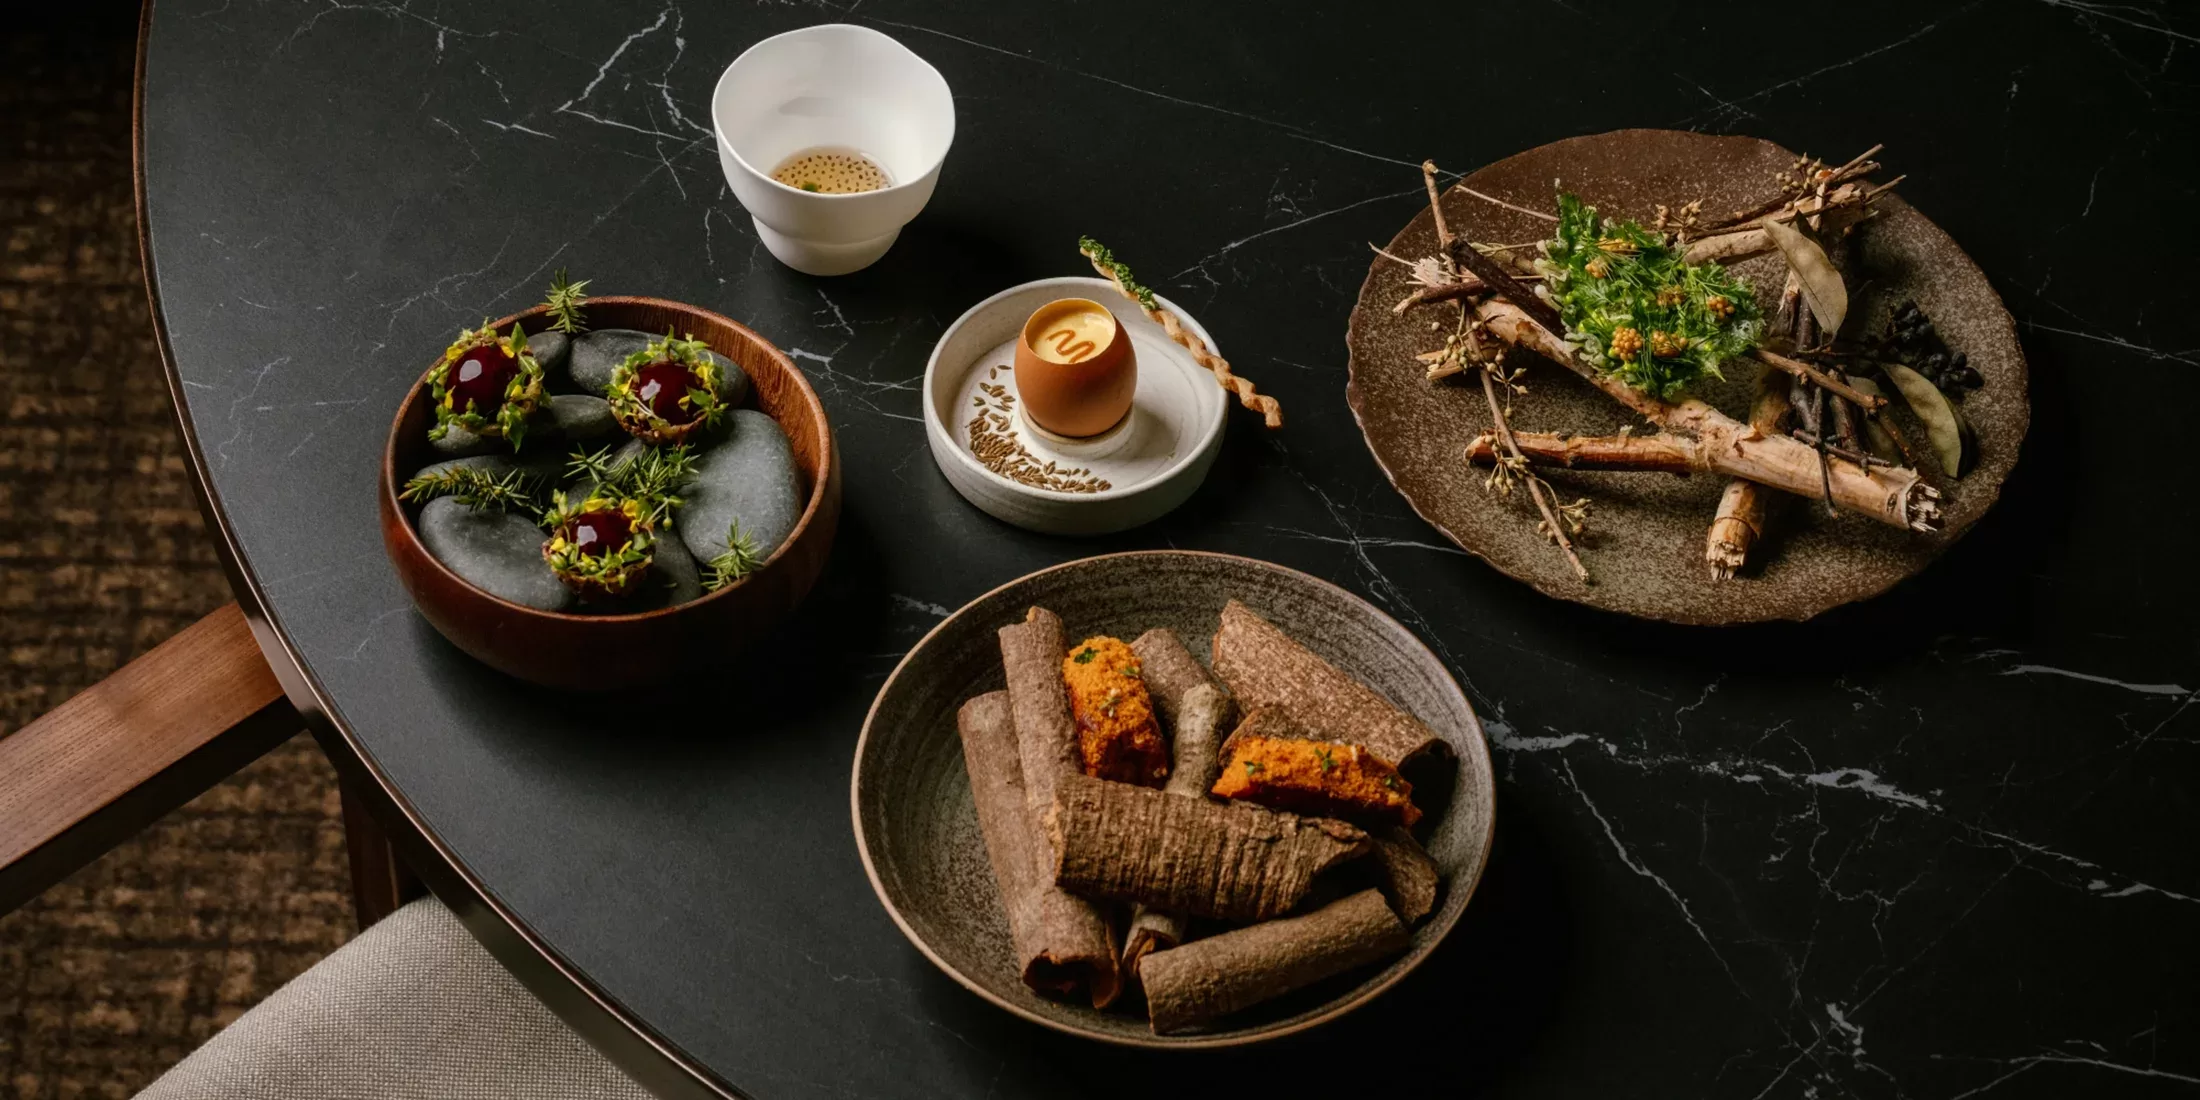 Display of beautiful, healthy dishes served on bowl plates on a black stone table at Feuille, Hong Kong